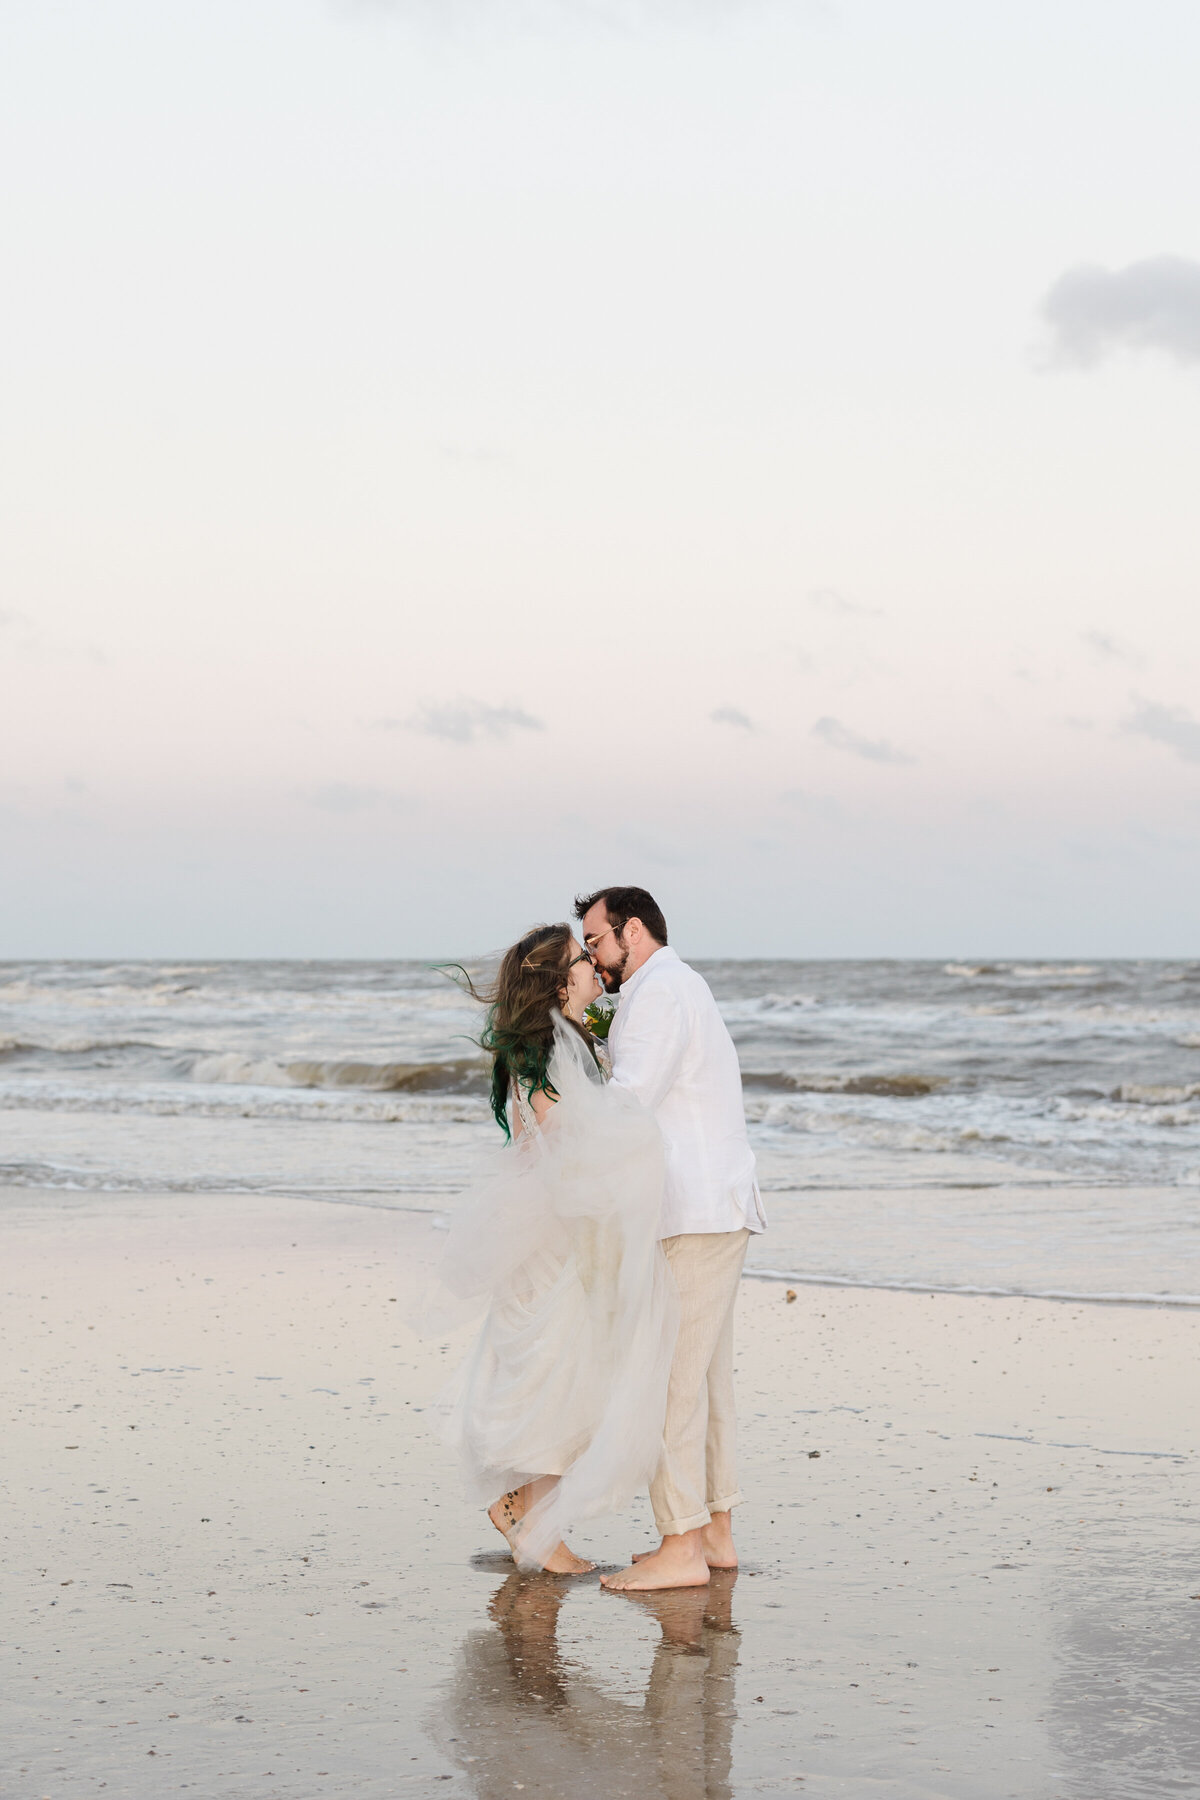 A portrait of a bride and groom sharing a kiss on the beach after their wedding ceremony at Crystal Beach, Texas. The bride is on the left and is wearing a white dress with a long, flowing veil. The groom is on the right and is wearing a white dress shirt with khaki pants.